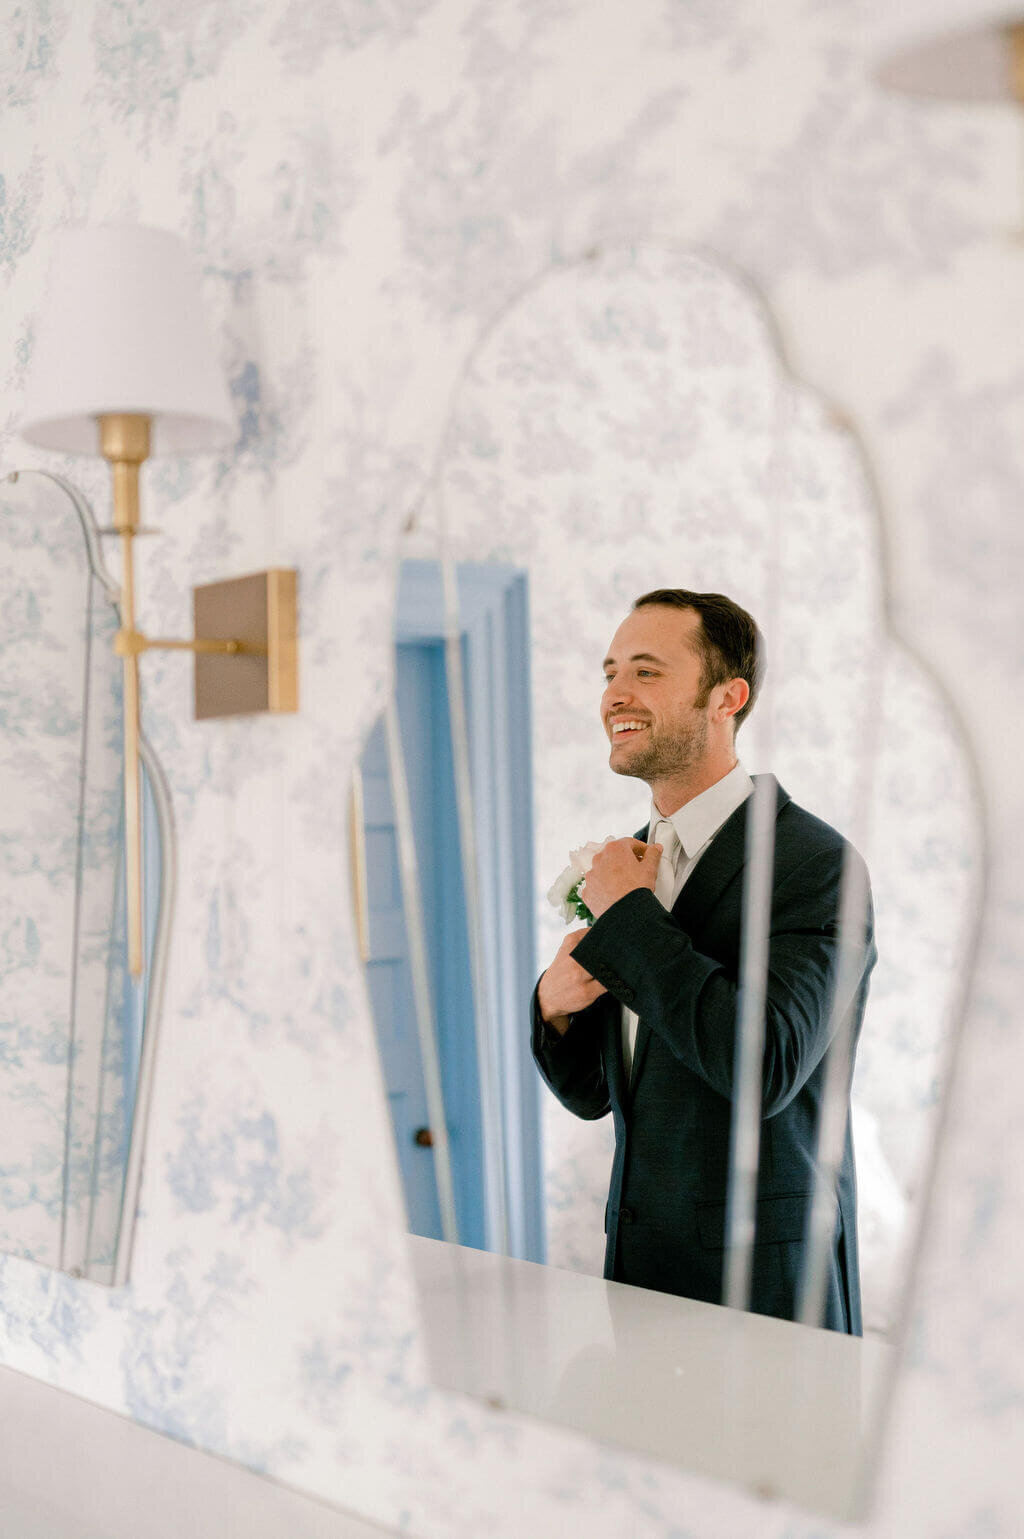 Groom tightening his tie before his wedding day, photographed by Rachael Mattio Photography